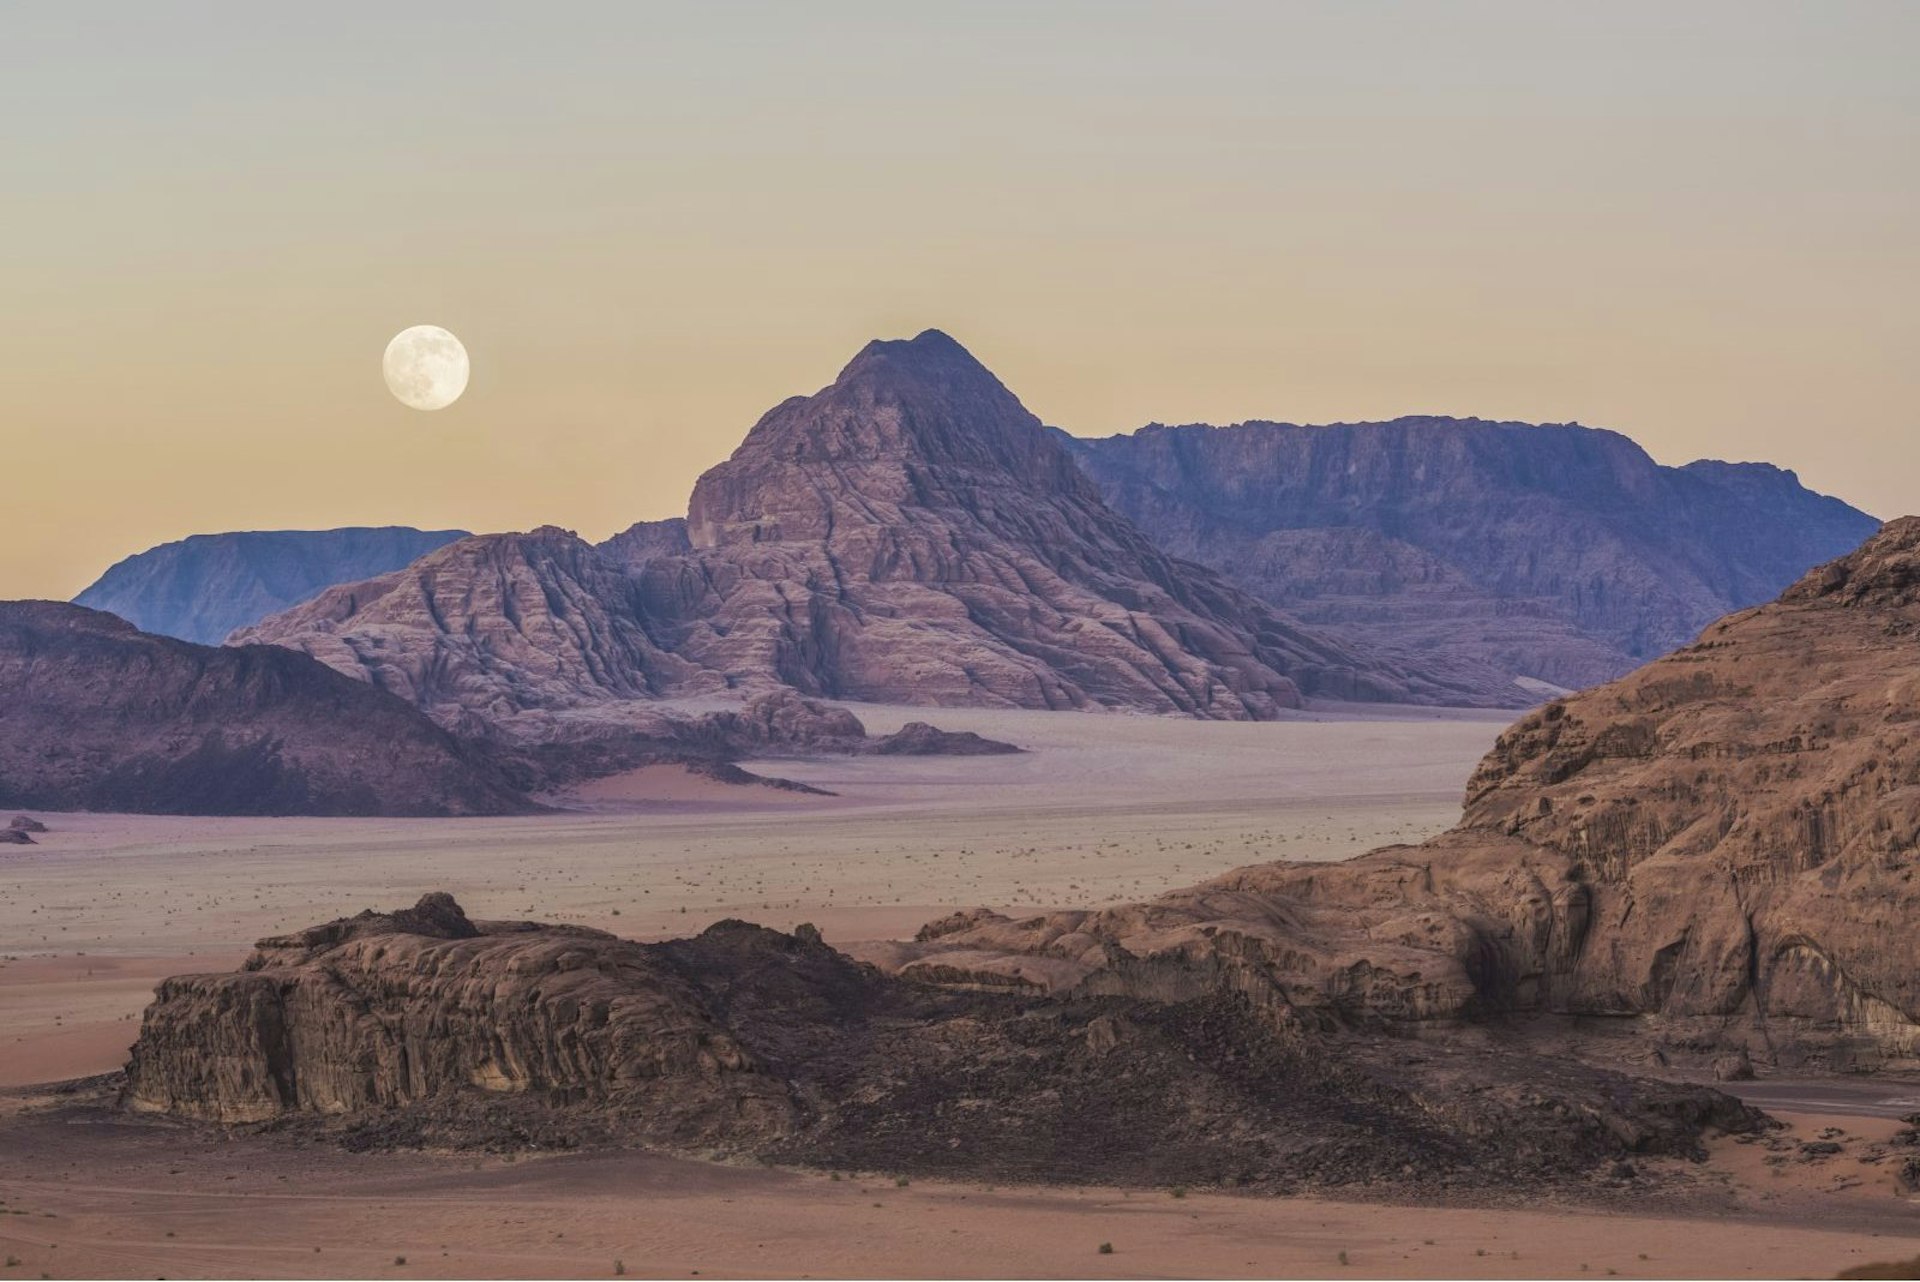 A pale red and brown landscape stretches out, with rocks and hills. The moon can be seen in the sky. The sky is slightly yellow giving the scene an eerie feel